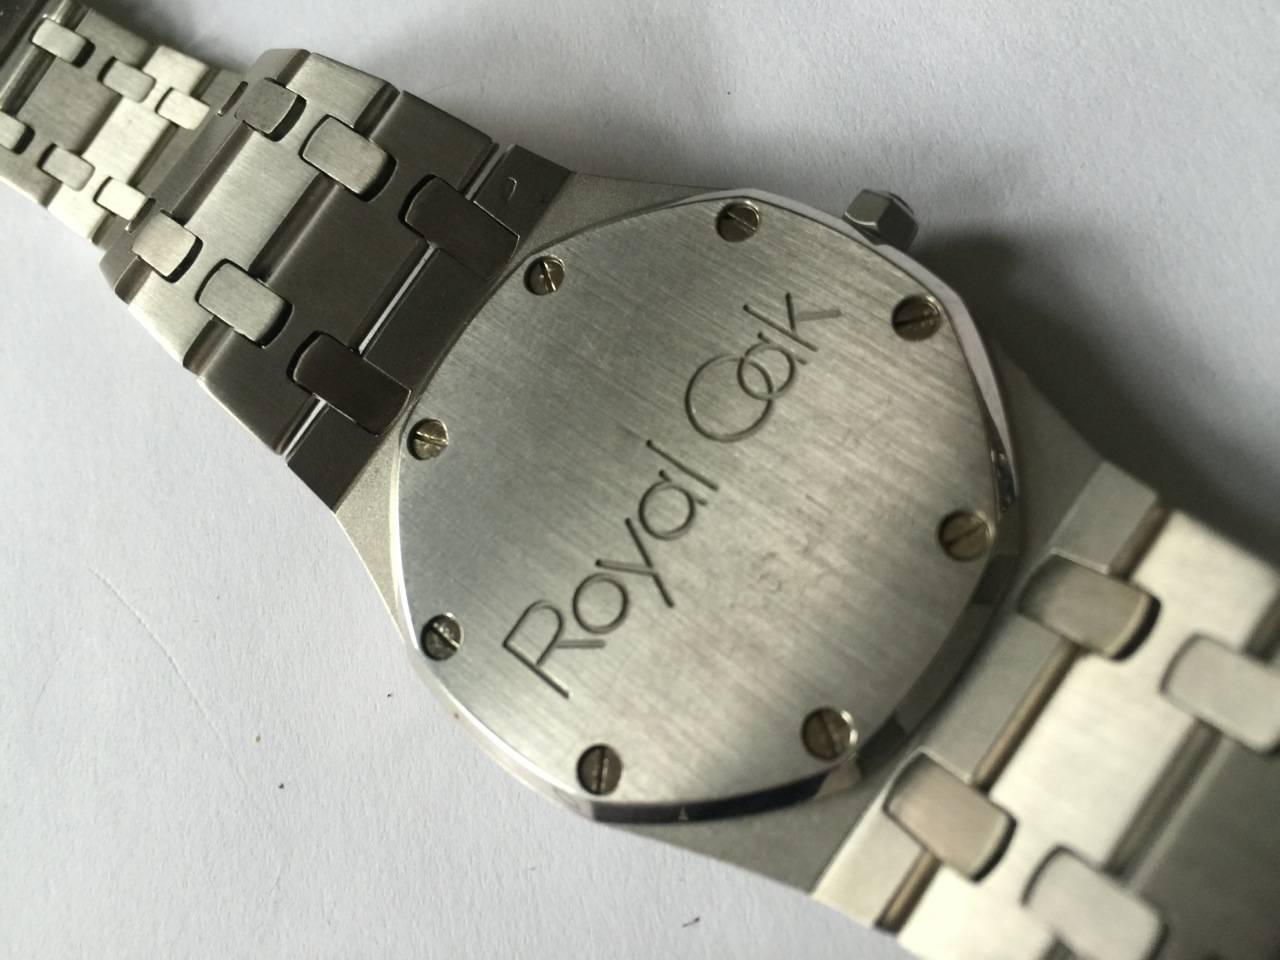 I searched quite a long time without any result.
the ap gave me this infos:

Case number: B69951.
RO number: 011.
Reference: 4100BC.

Originally sold in 1981 in Germany with a 2123 mechanical movement numbered 228761. The movement was